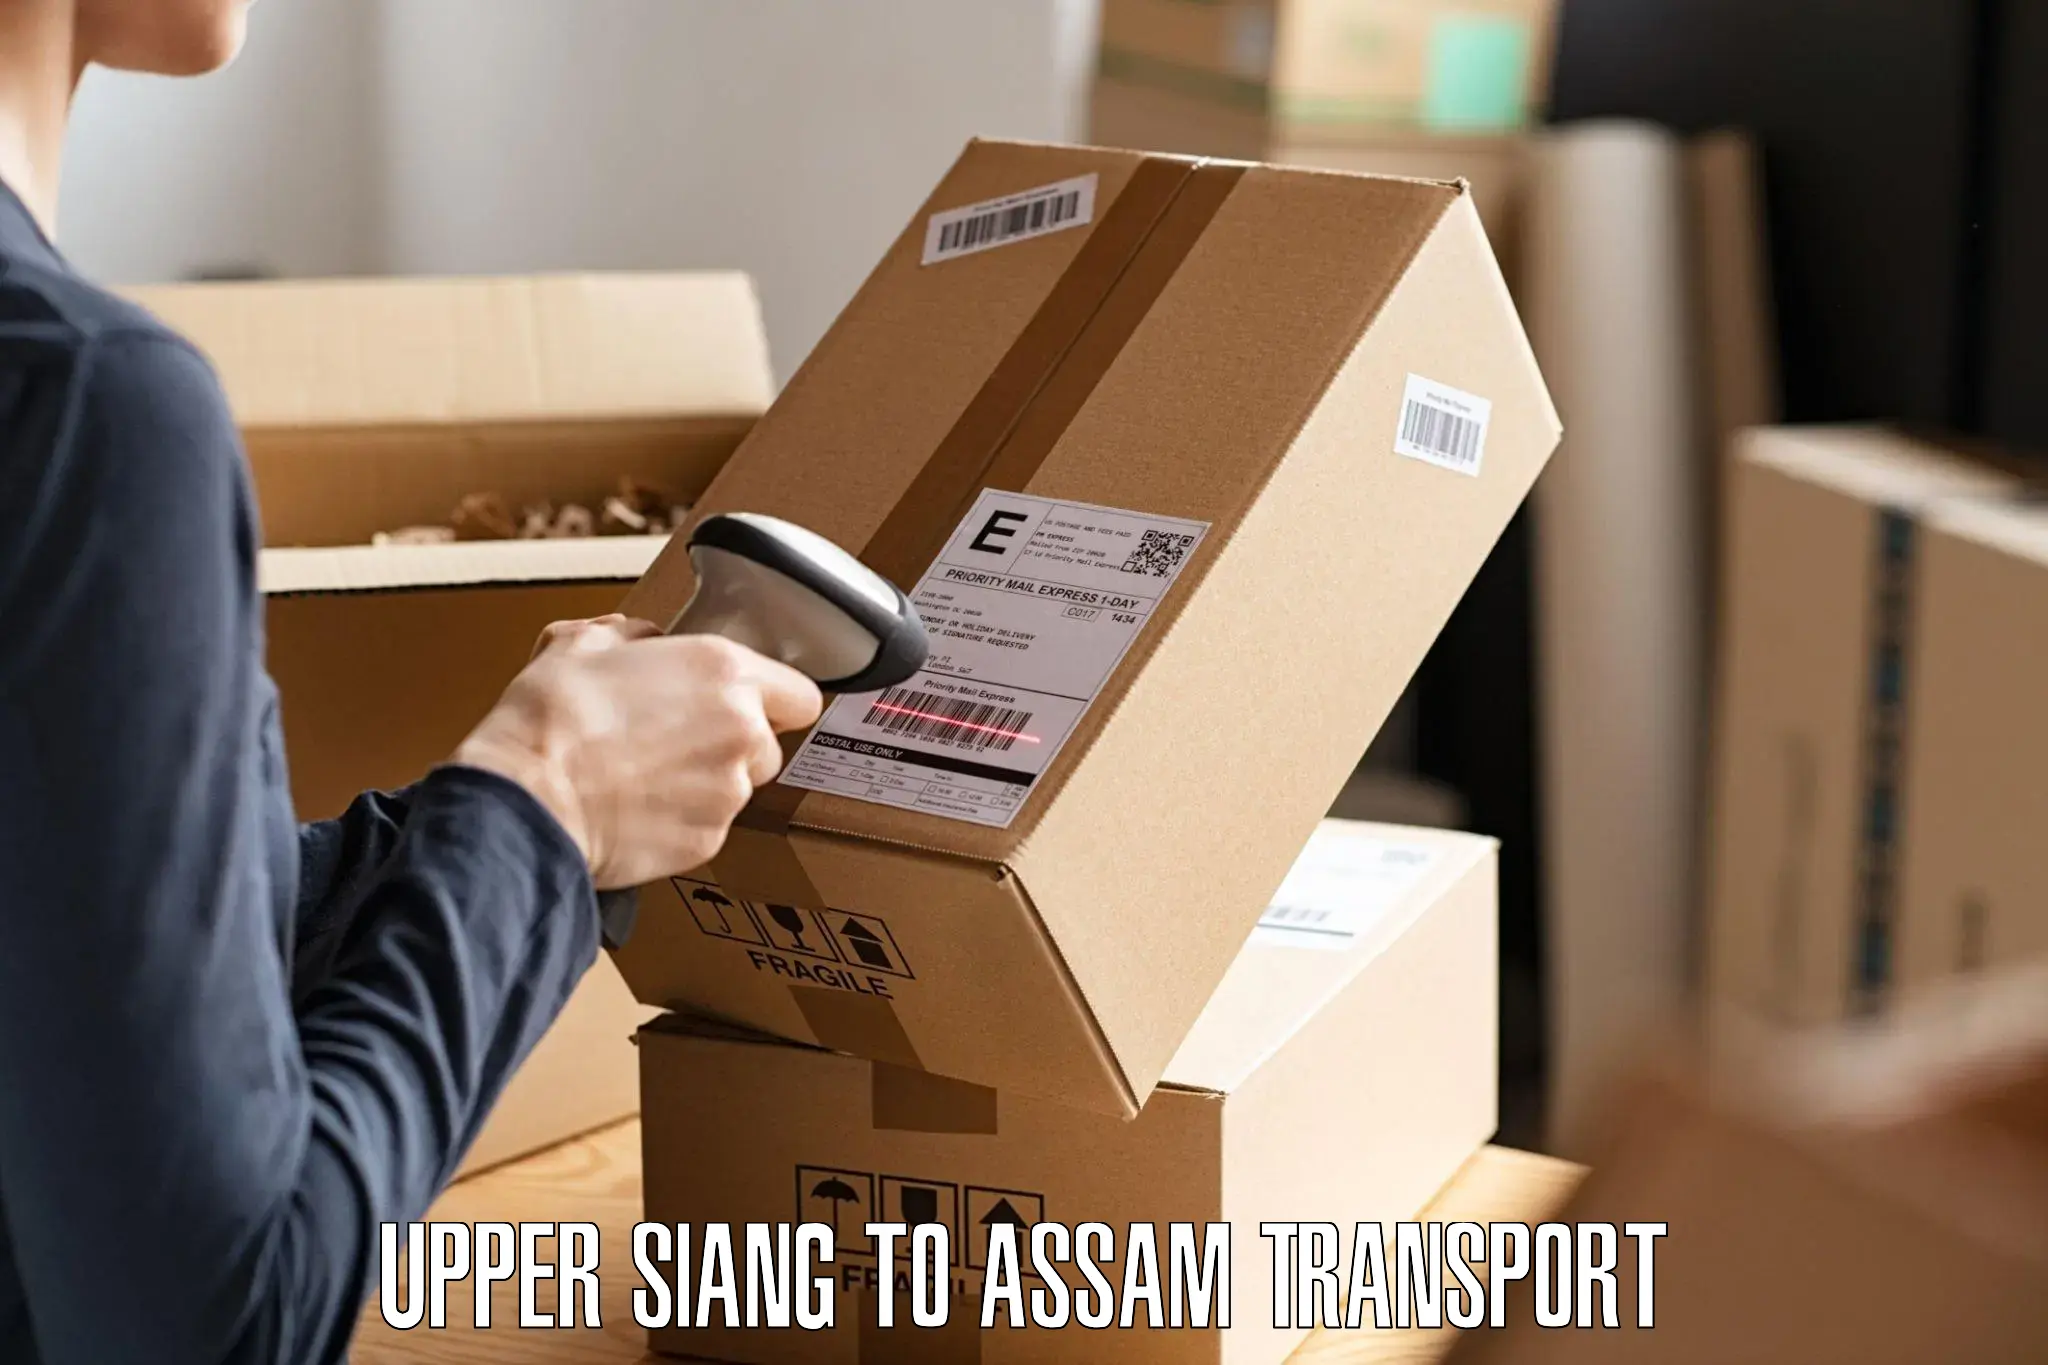 Daily transport service Upper Siang to Assam